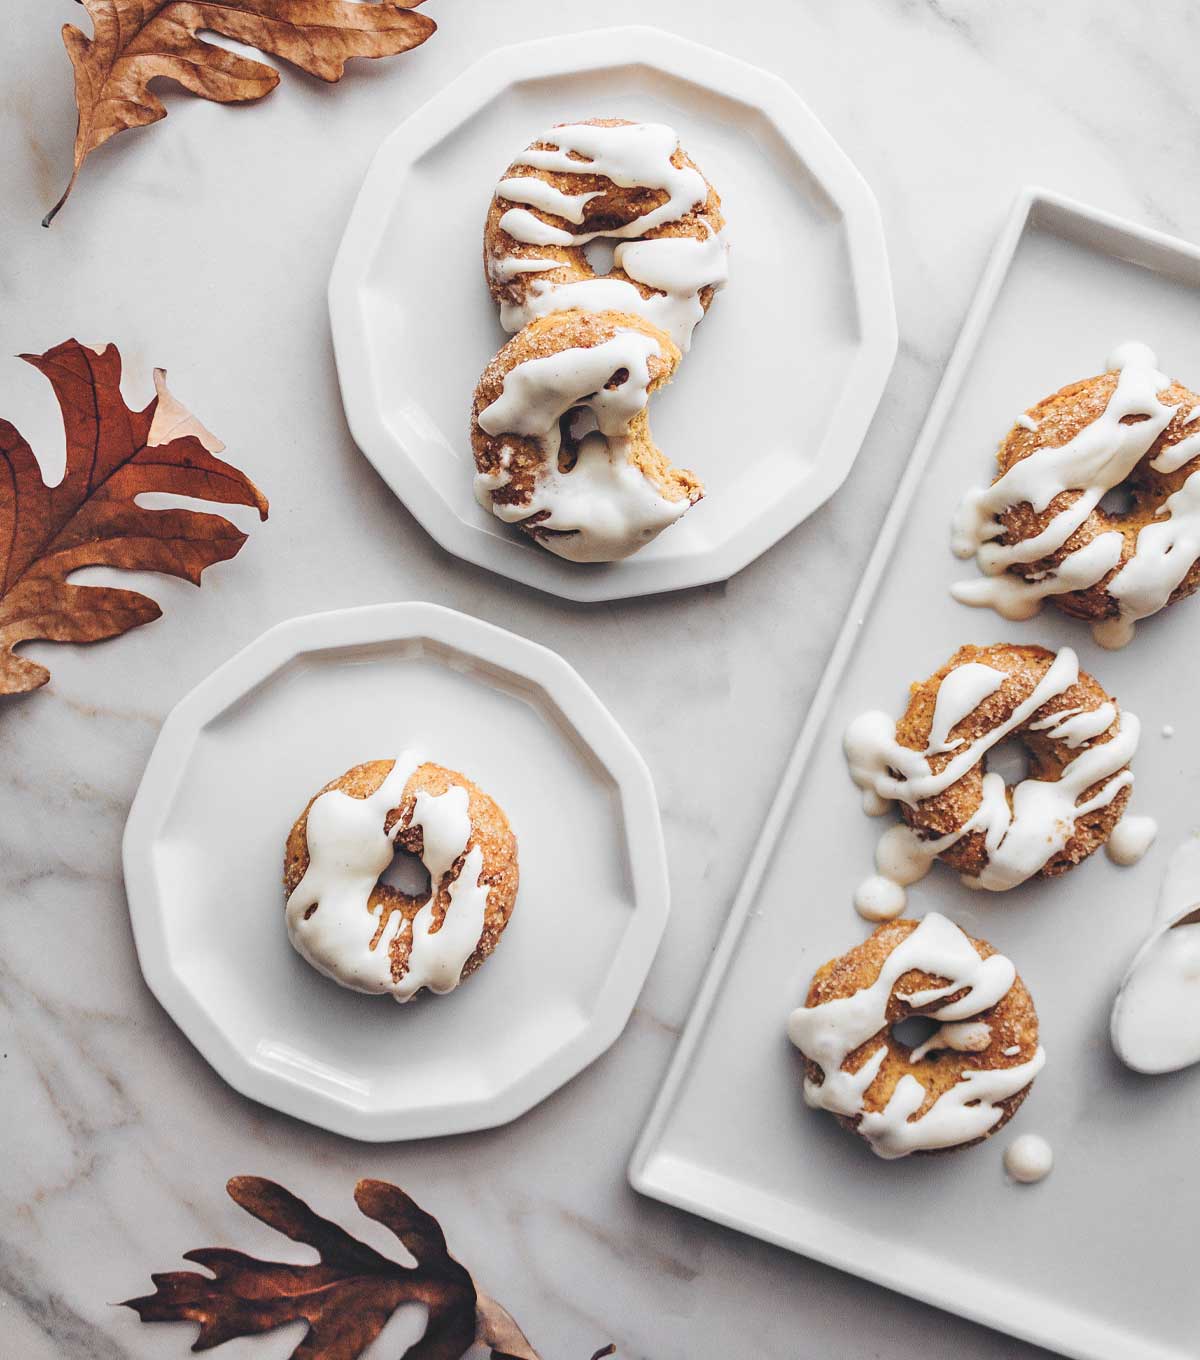 A marble countertop with white plates containing pumpkin spice donuts drizzled with cream cheese glaze. Fall oak leaves are scattered about.